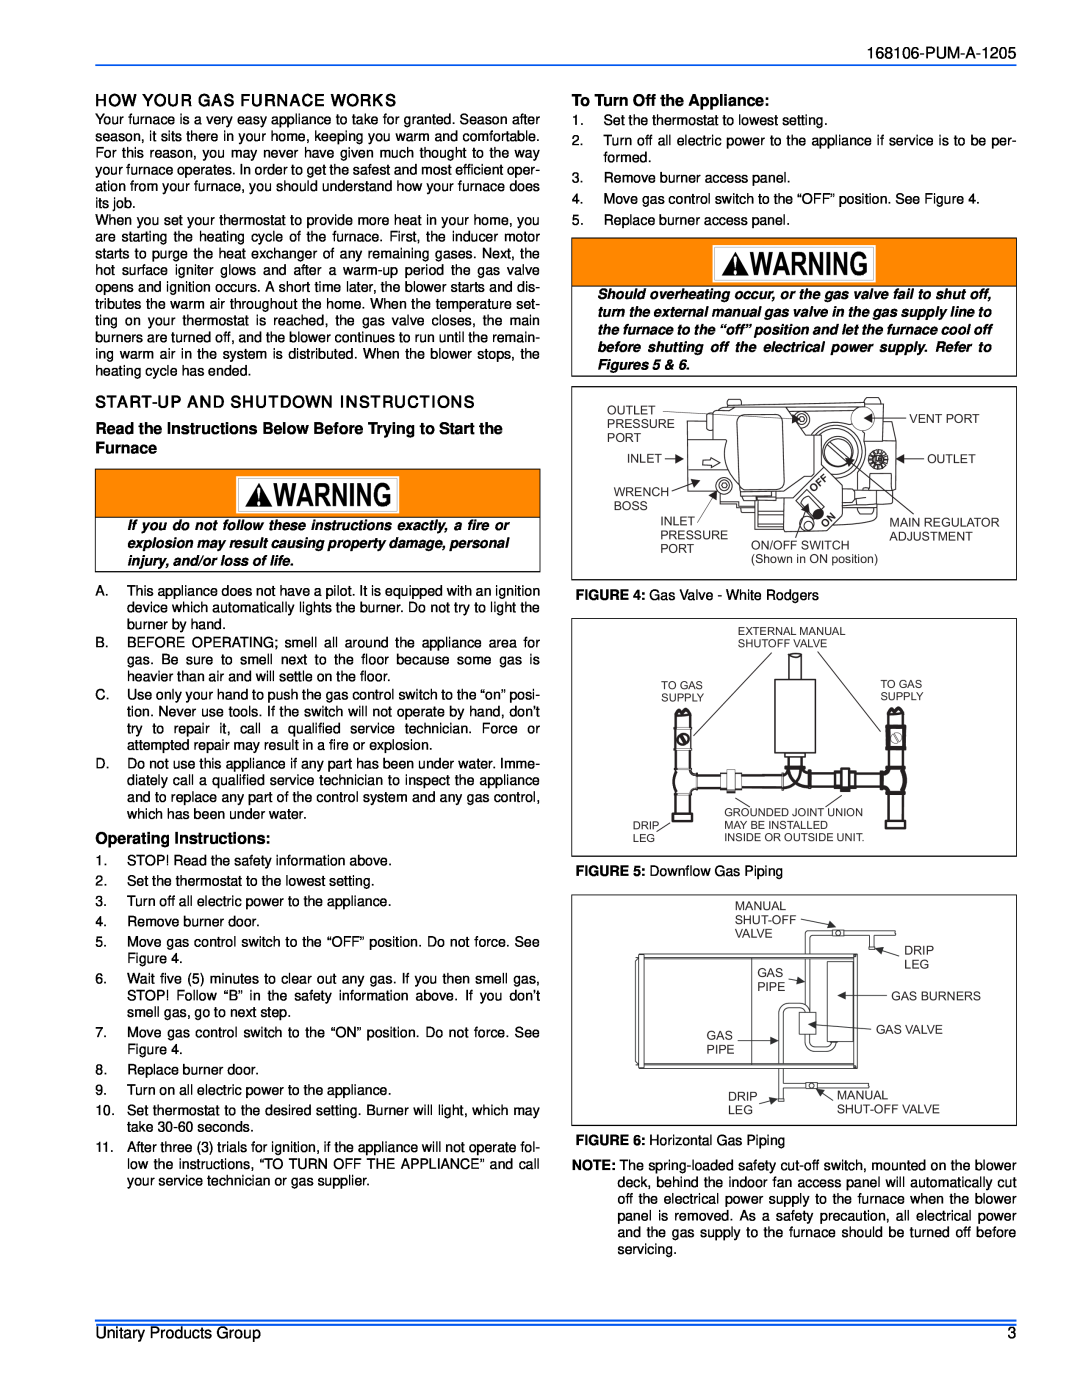 York GY9 How Your Gas Furnace Works, To Turn Off the Appliance, Start-Upand Shutdown Instructions, Operating Instructions 